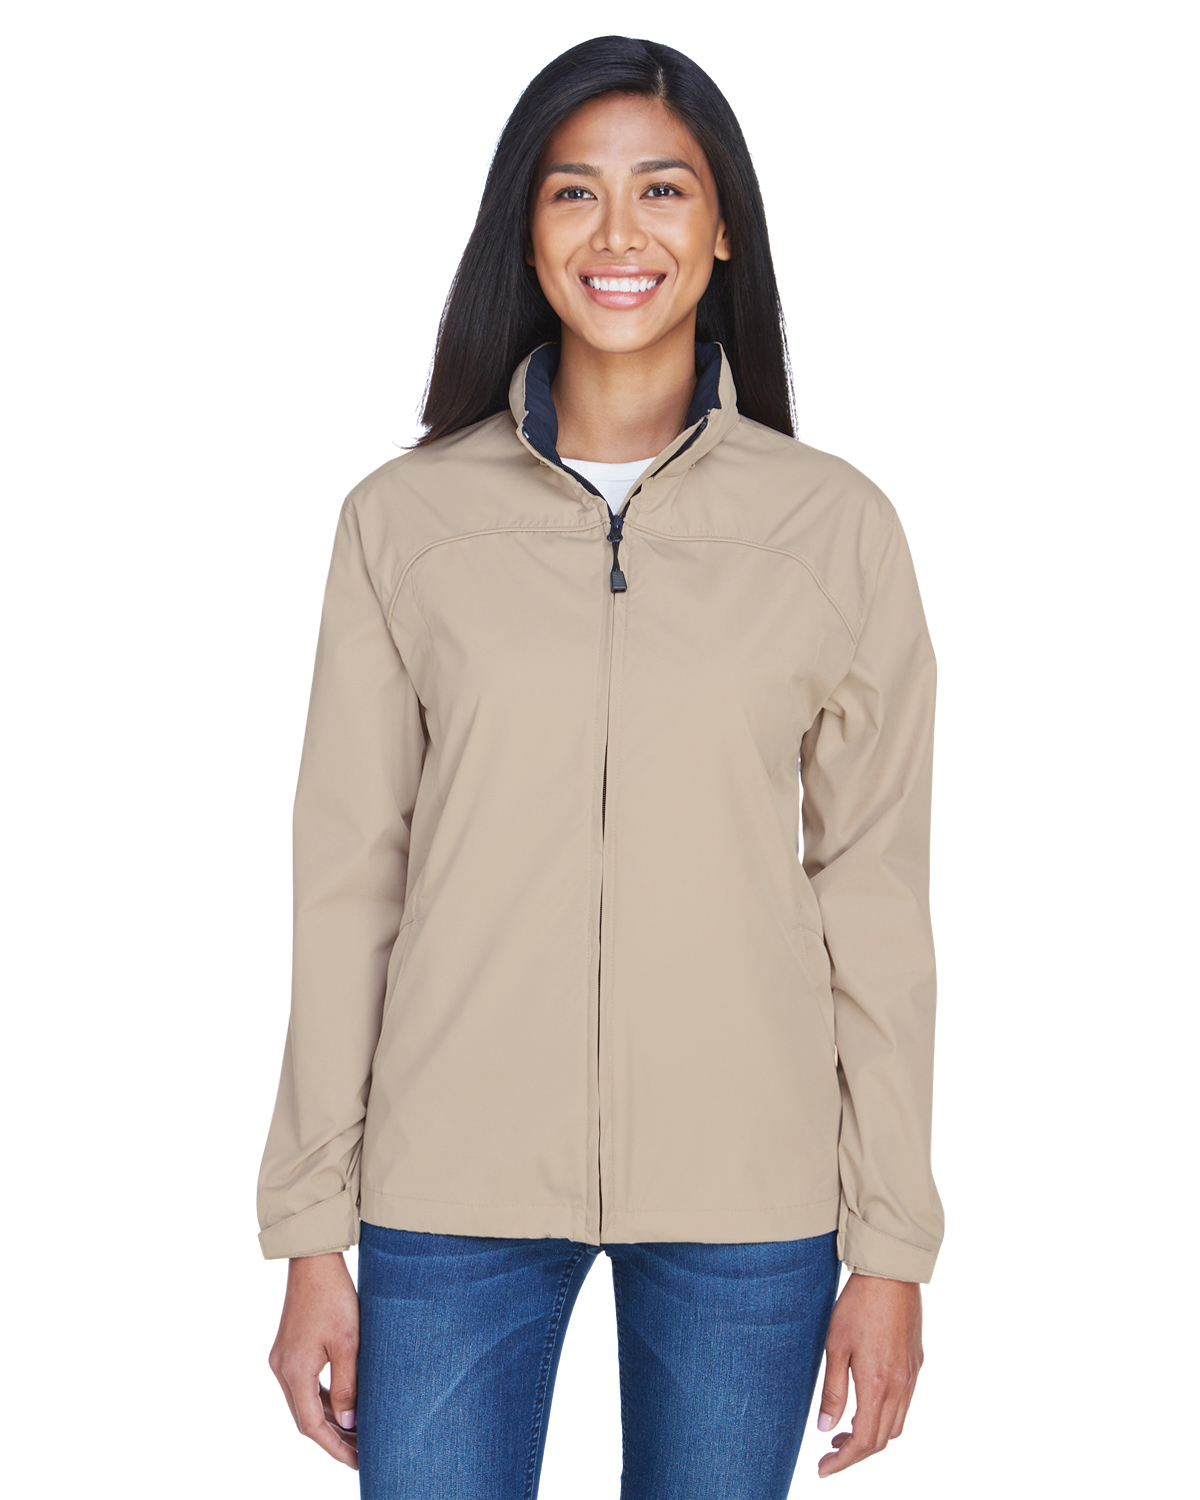 The Ash City - North End Ladies' Techno Lite Jacket - PUTTY 734 - L - image 1 of 2